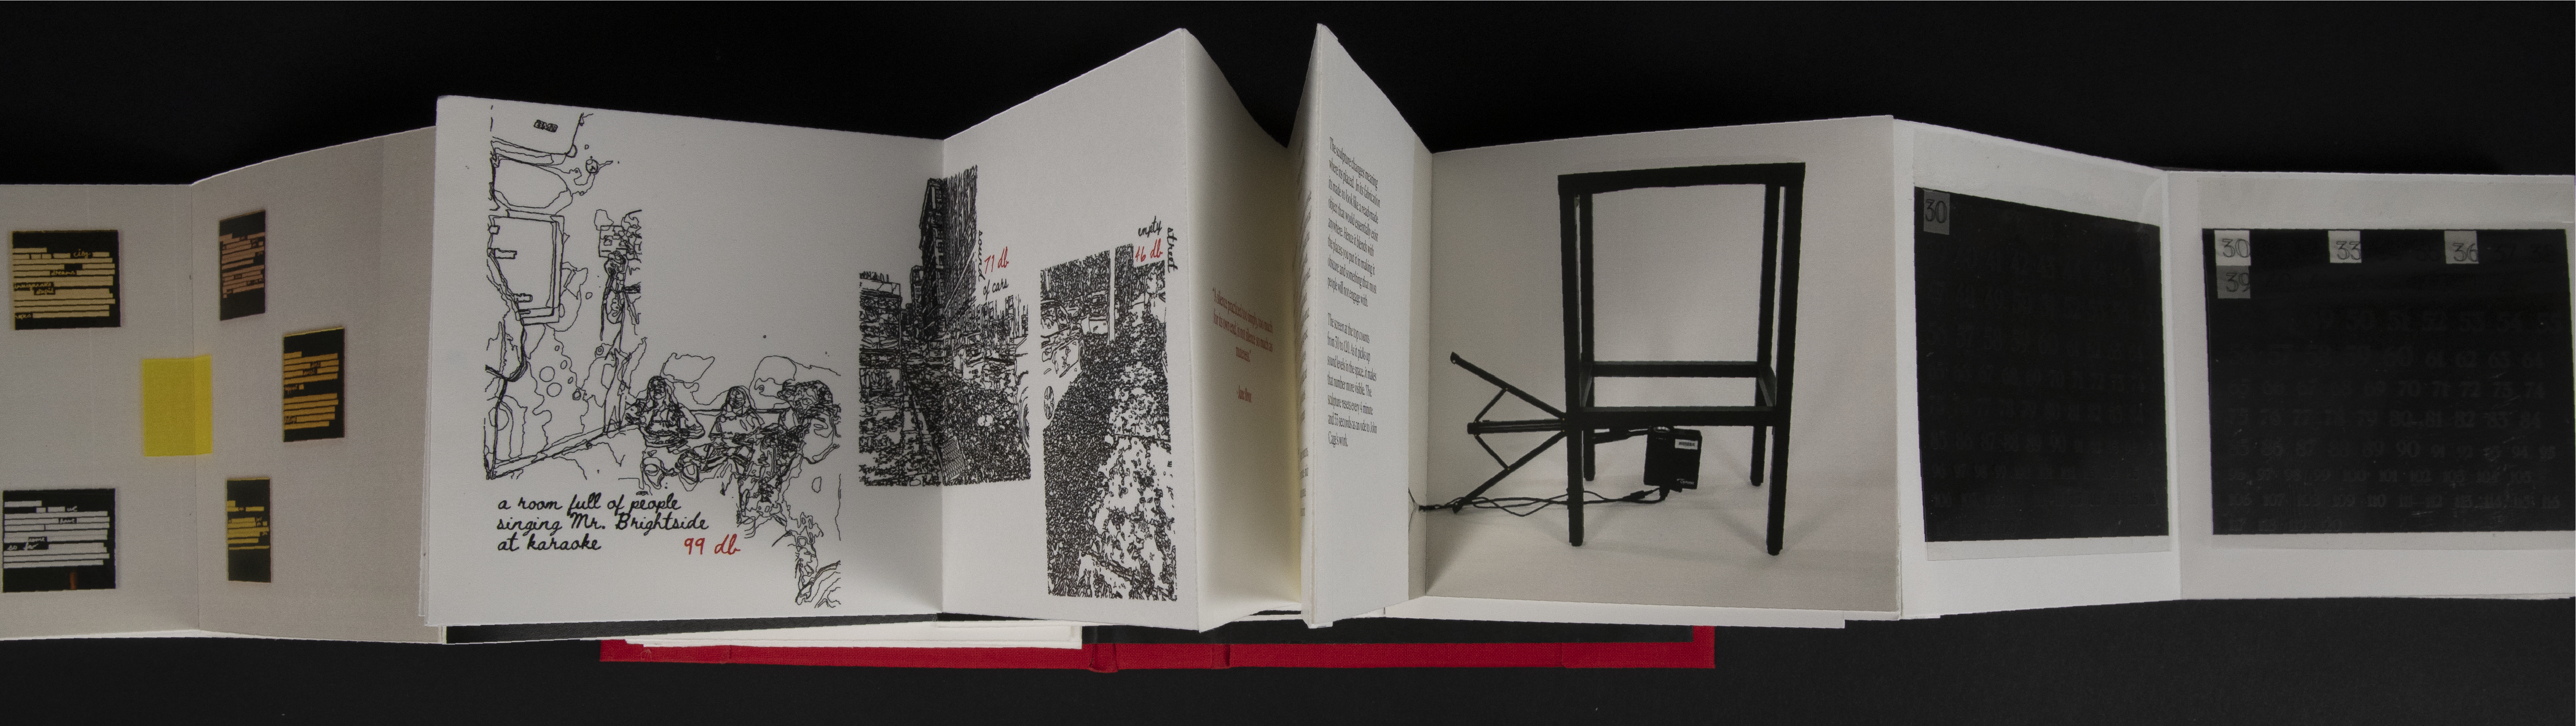 Book opened, pages fanned, showing multiple parts of the book and overlapping content. Book content includes images of a series of projects (from left to right): mirrored acrylic squares, drawings with decibel levels of instances, a table sculpture that records sound, data visualization of the sound.